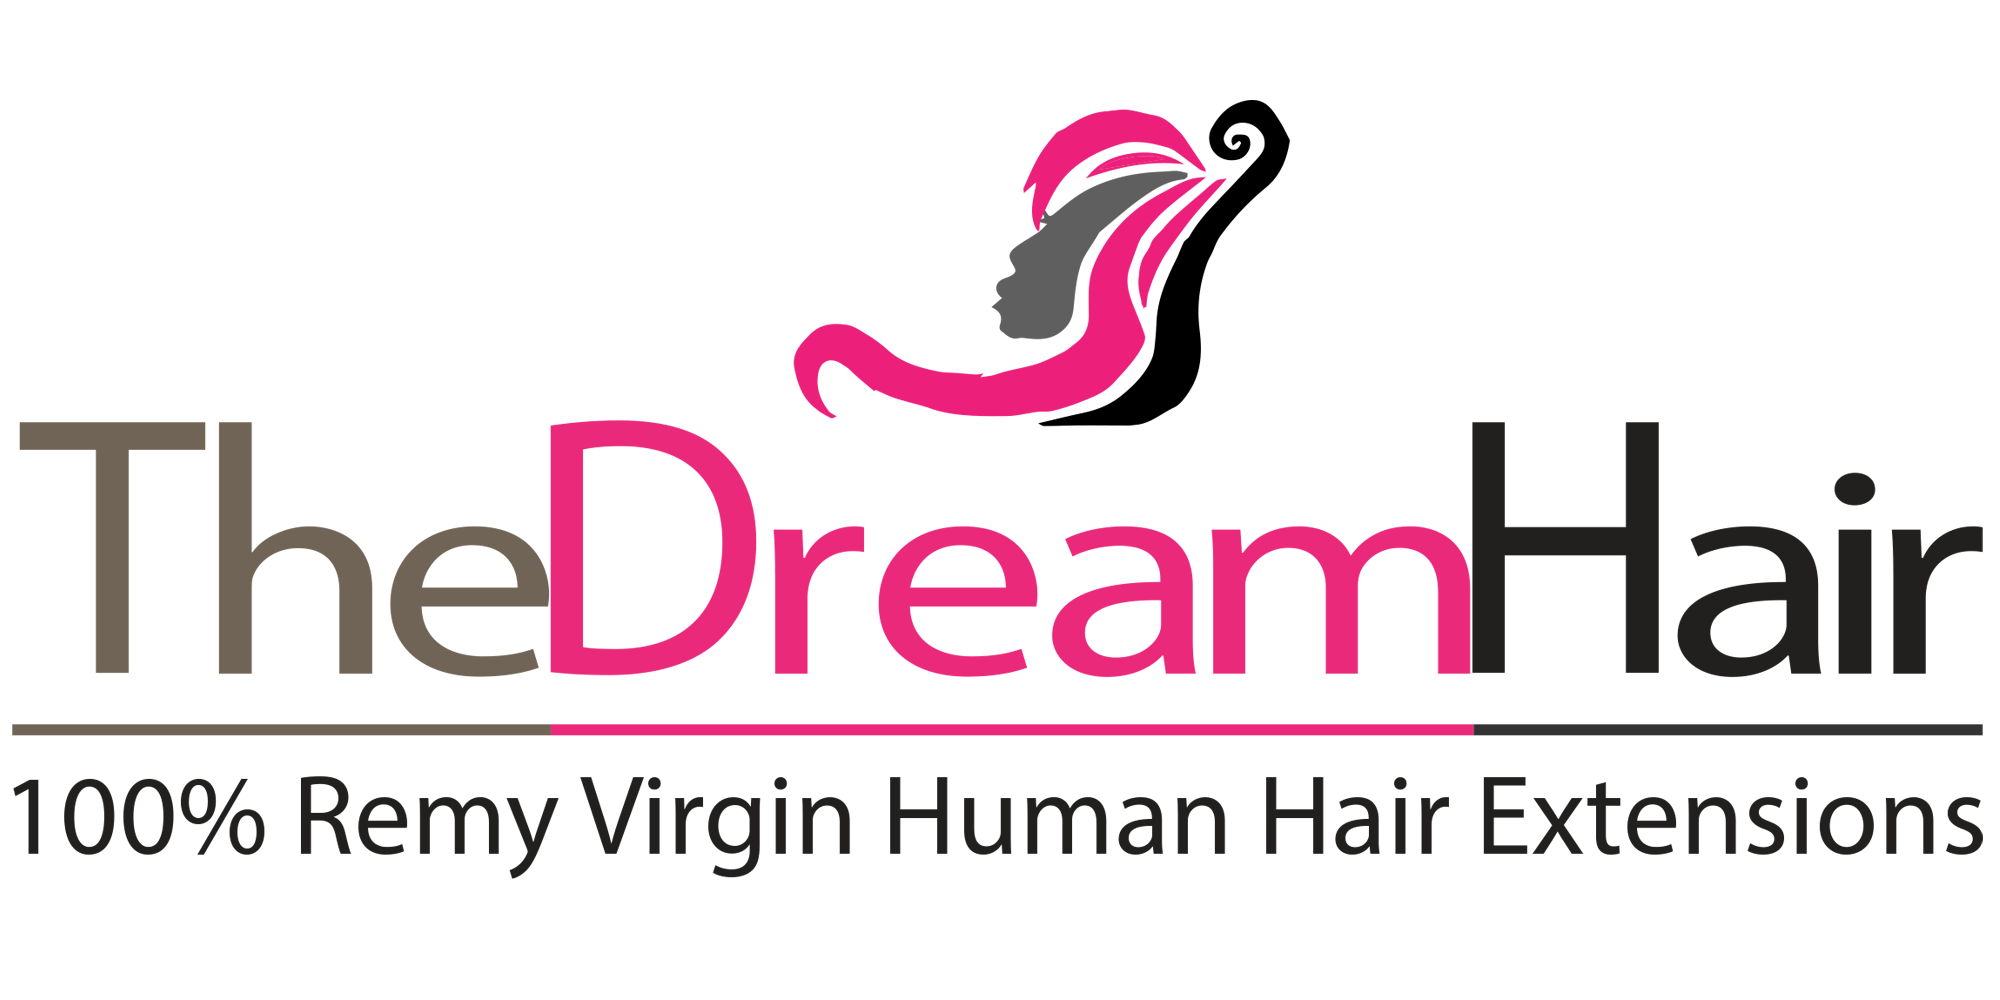 TheDreamHair